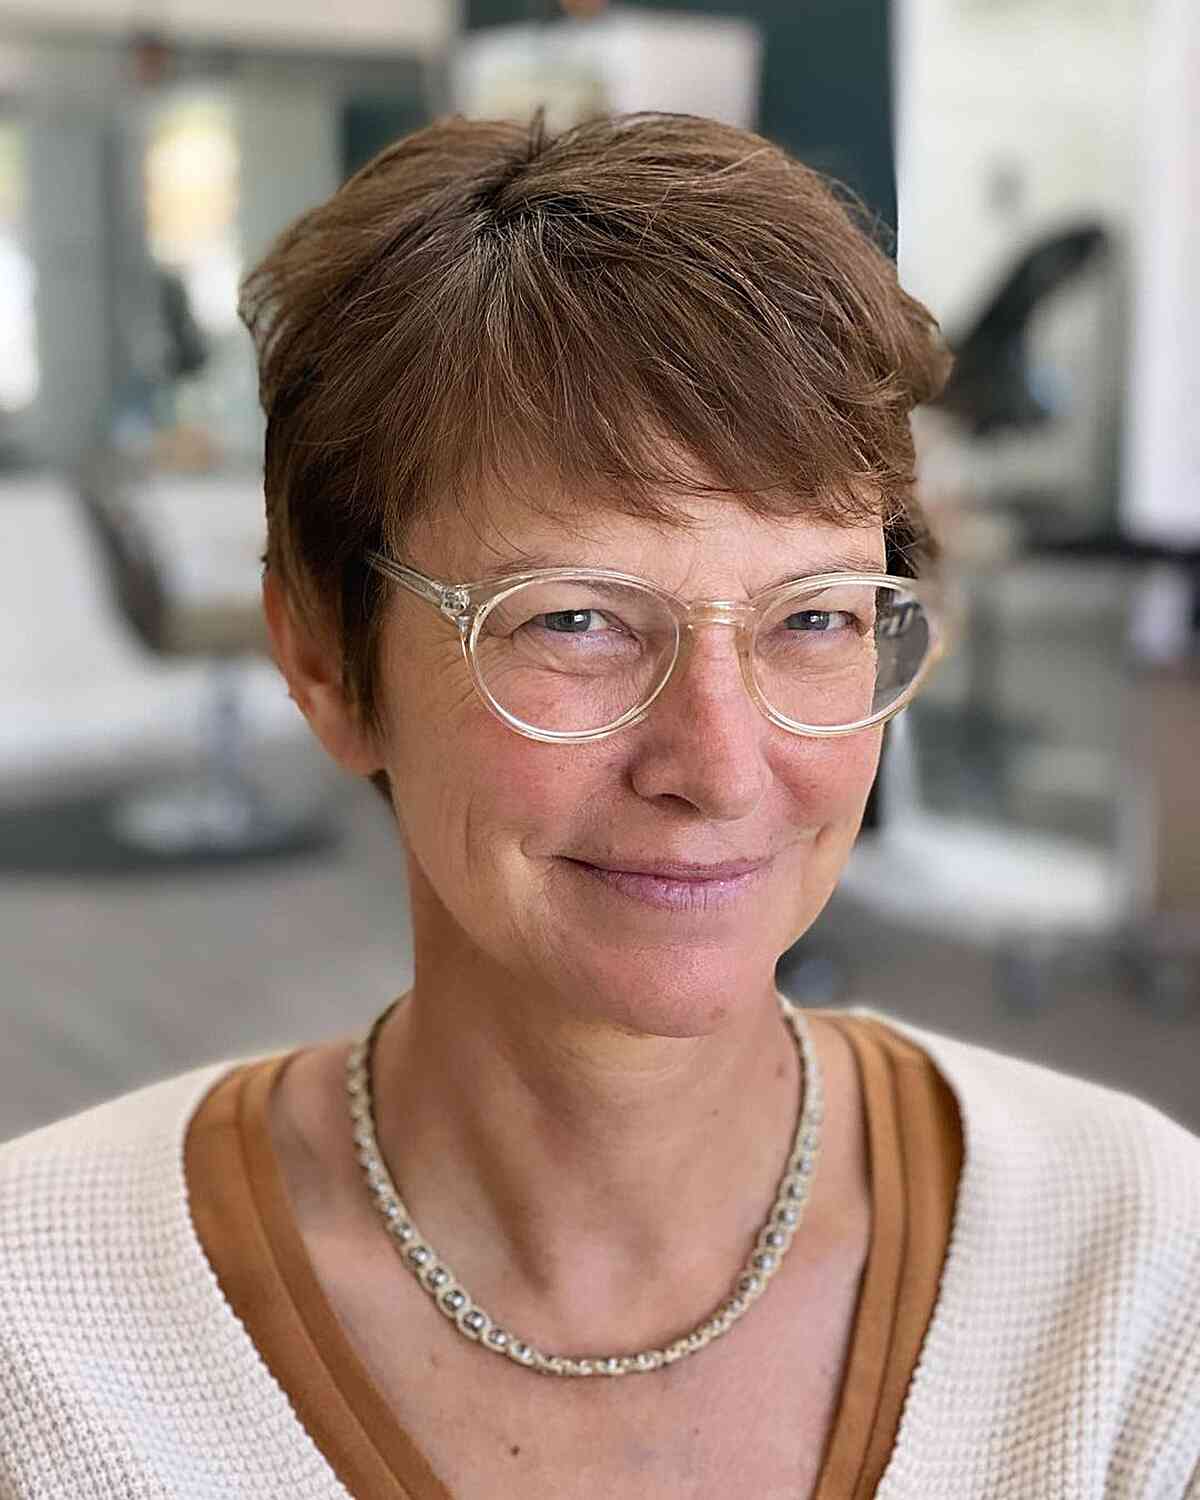 Soft Pixie Style with Sweeping Fringe for Mature Ladies Aged 50 Wearing Glasses